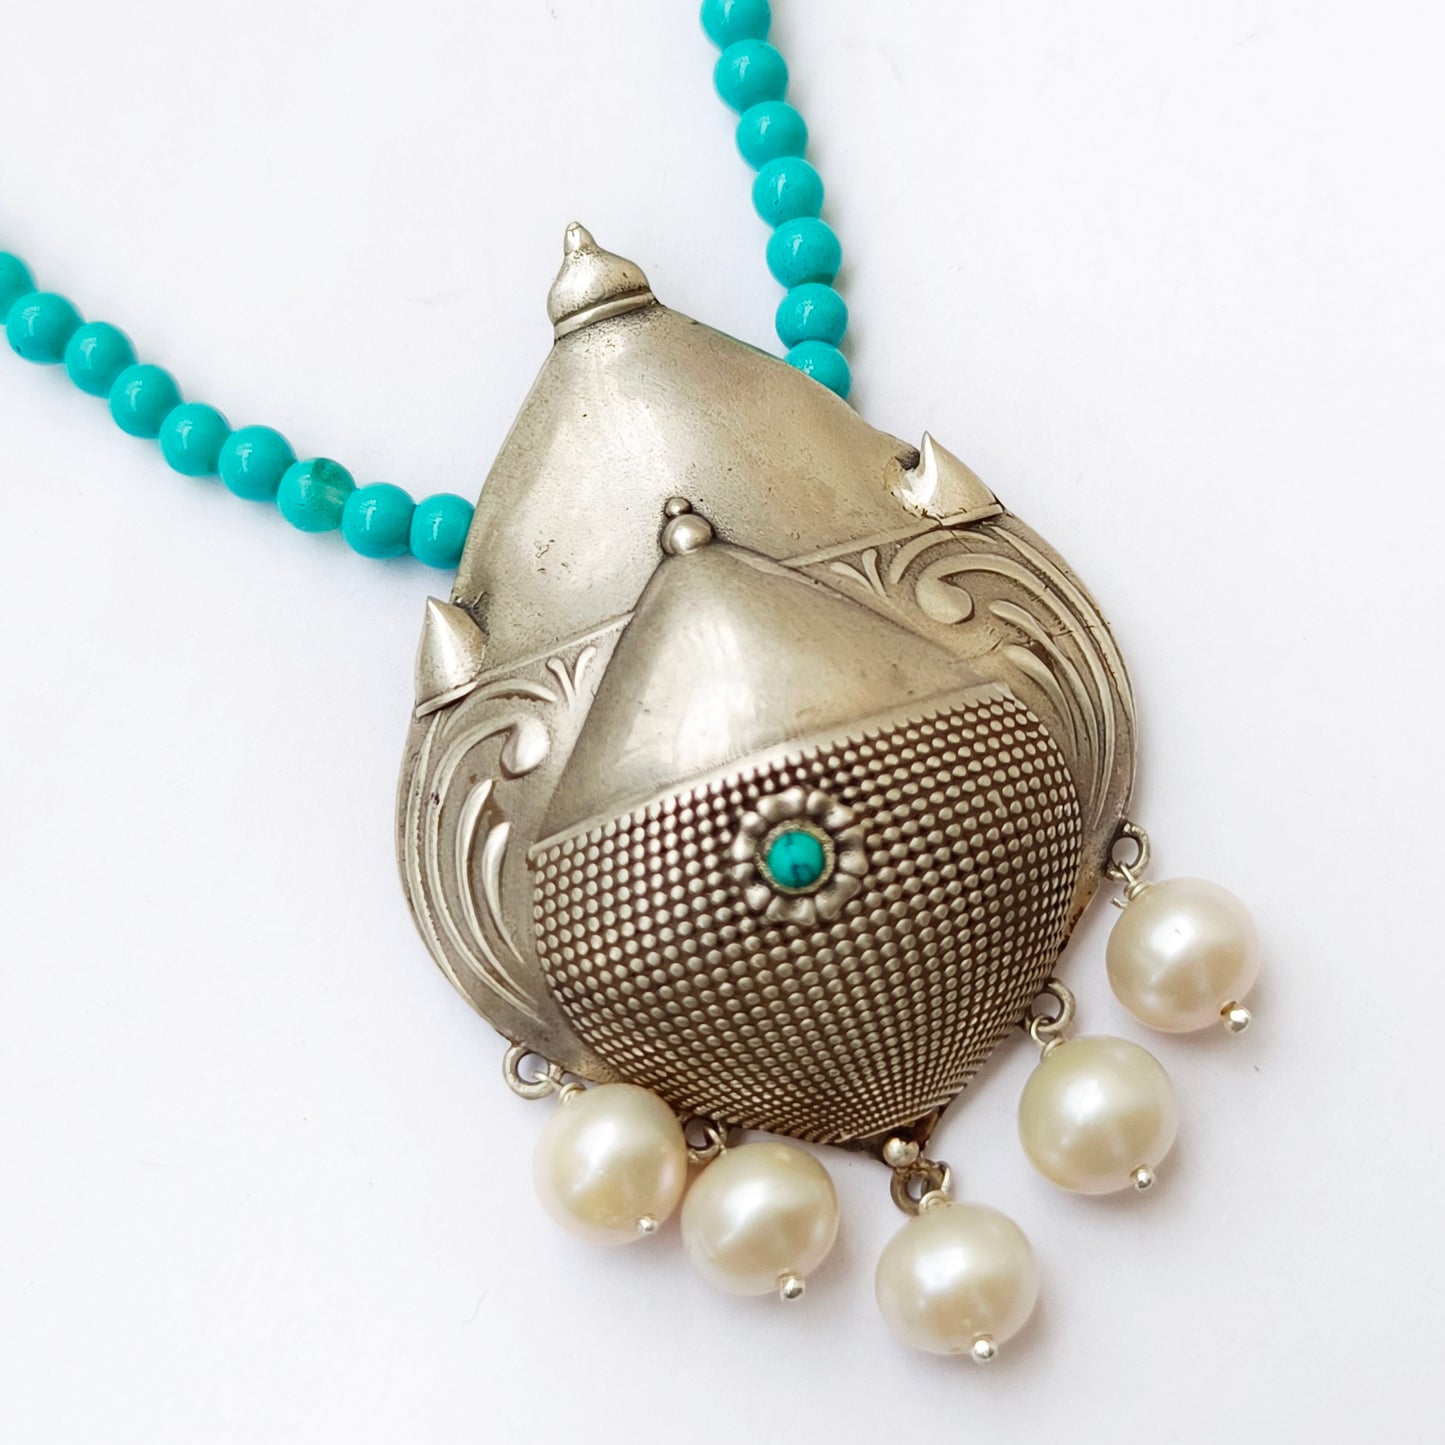 Gangotri Necklace with Turquoise Beads